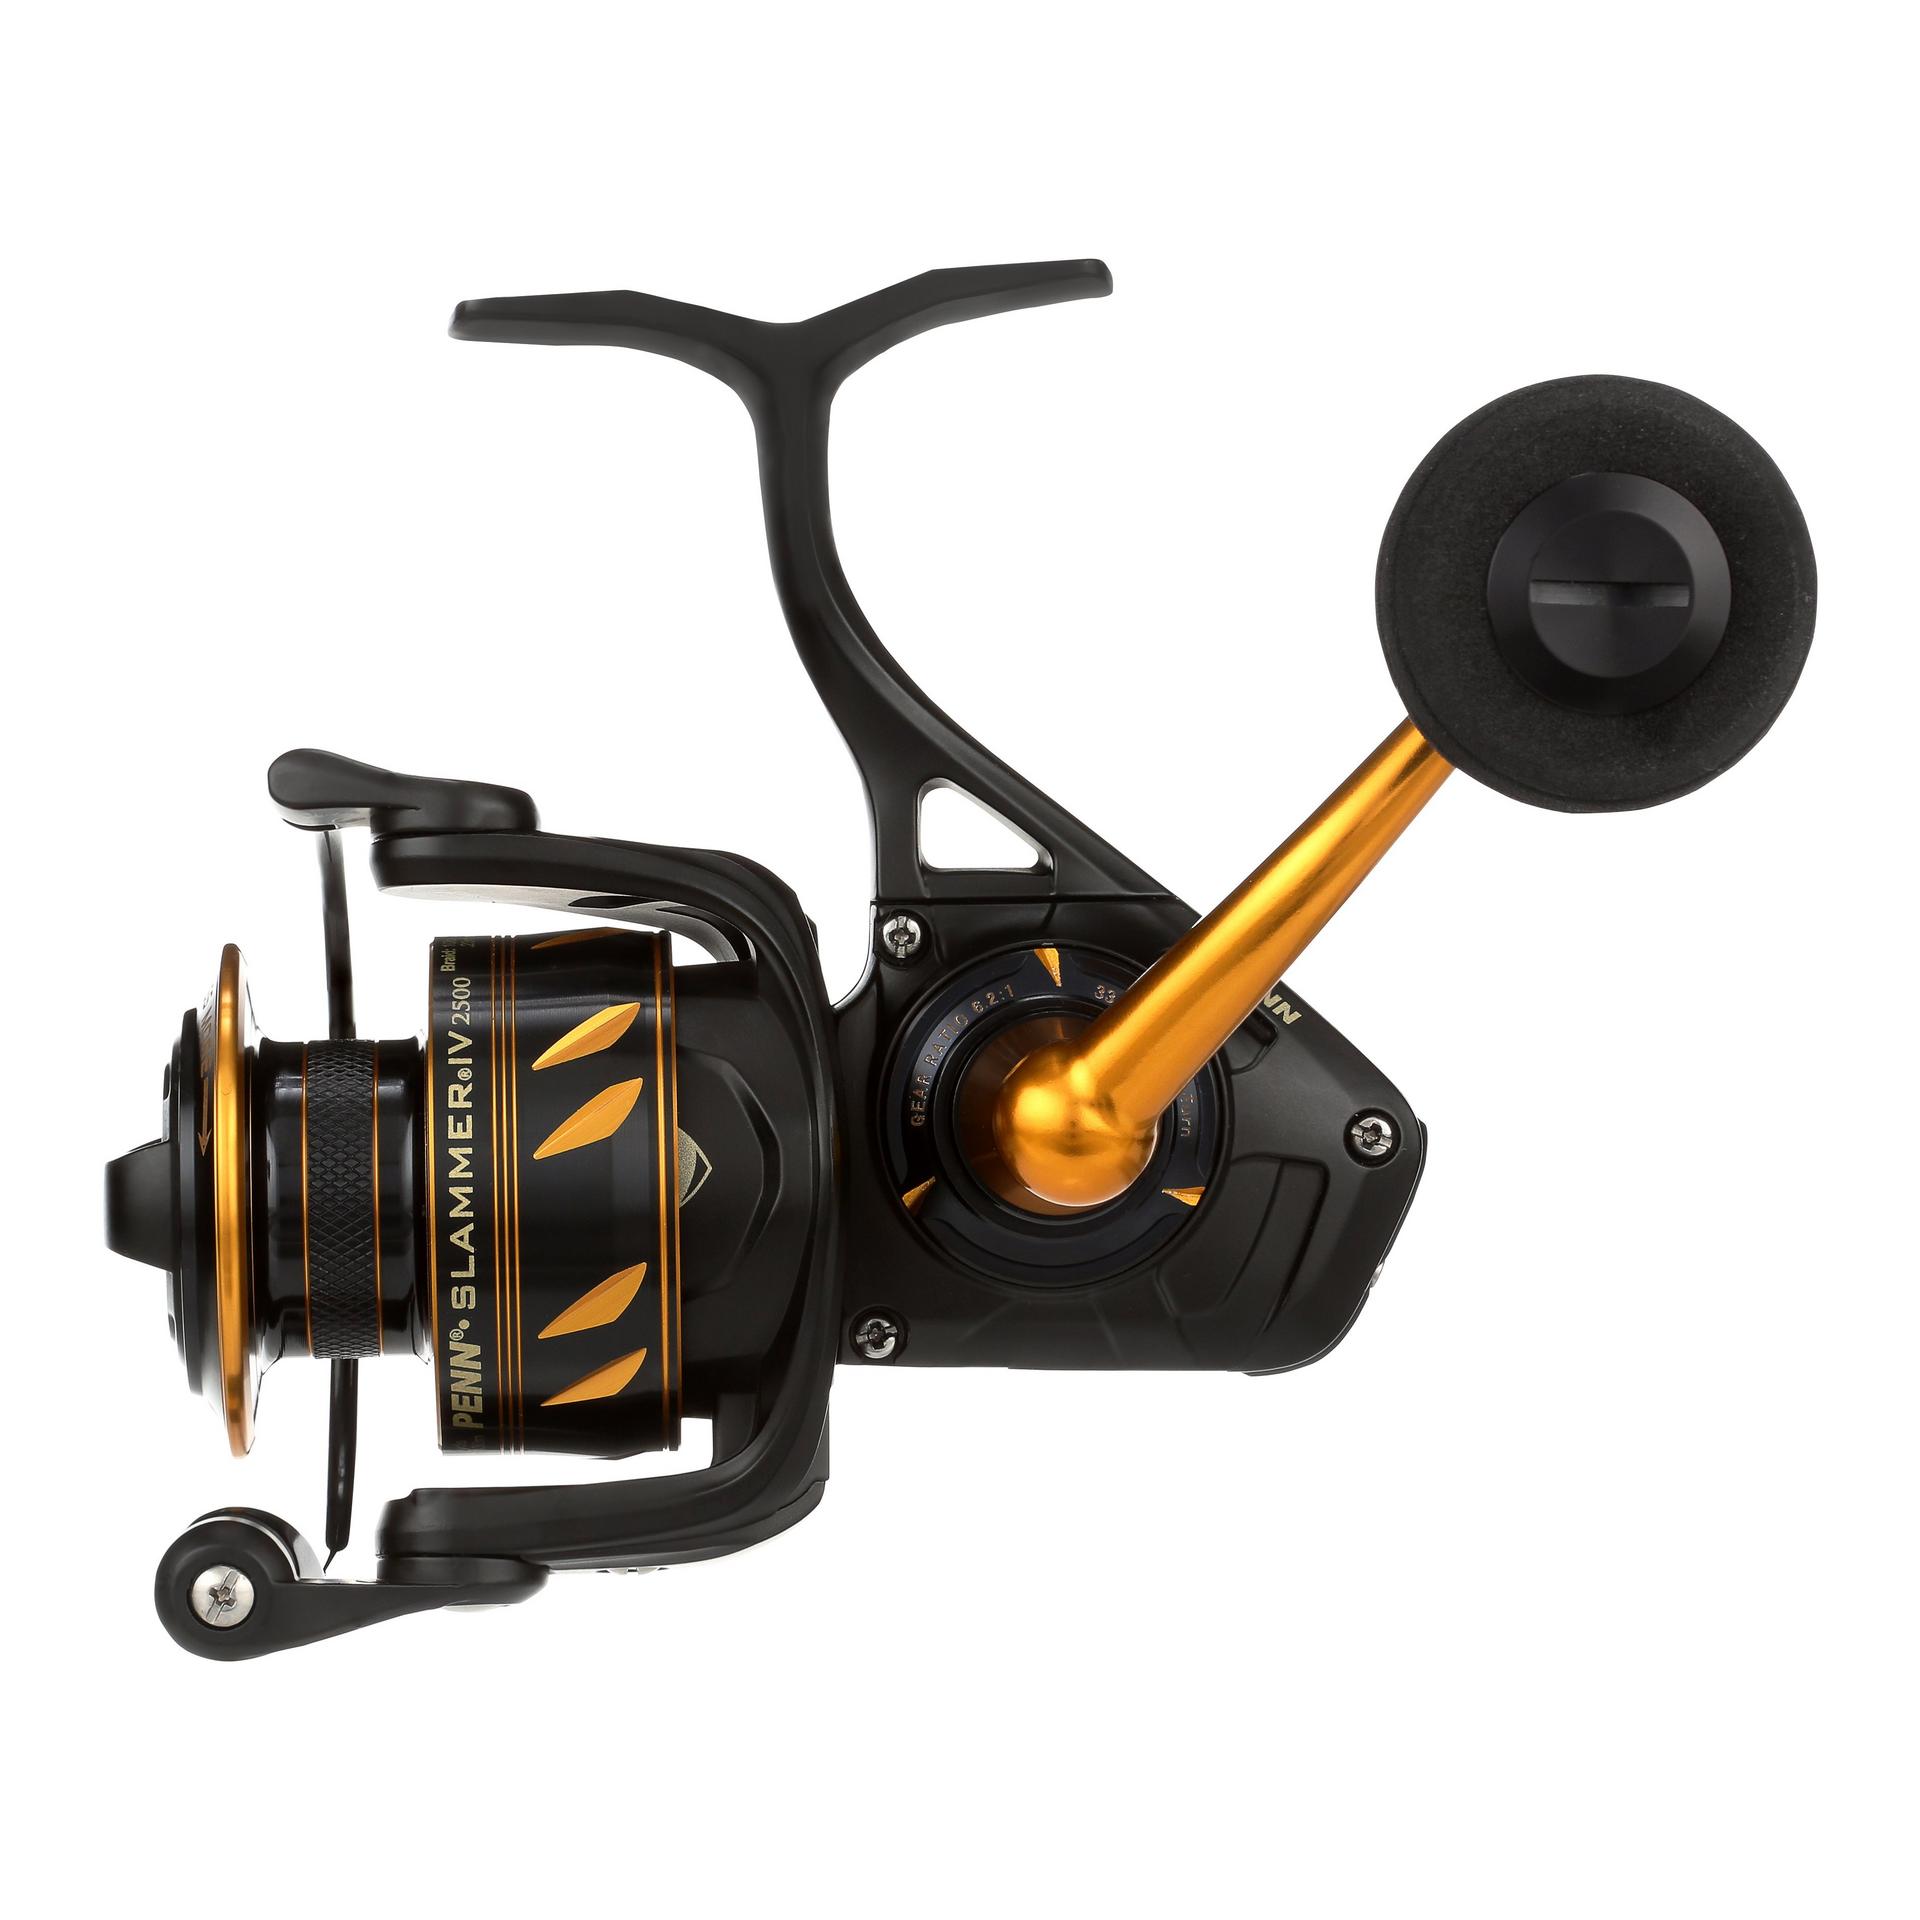 Penn Slammer IV 2500 is a great little spinning reel! Smooth, durable and  fully sealed.  #jandhtackle #fishing #jigging  #pennreels, By J&H Tackle